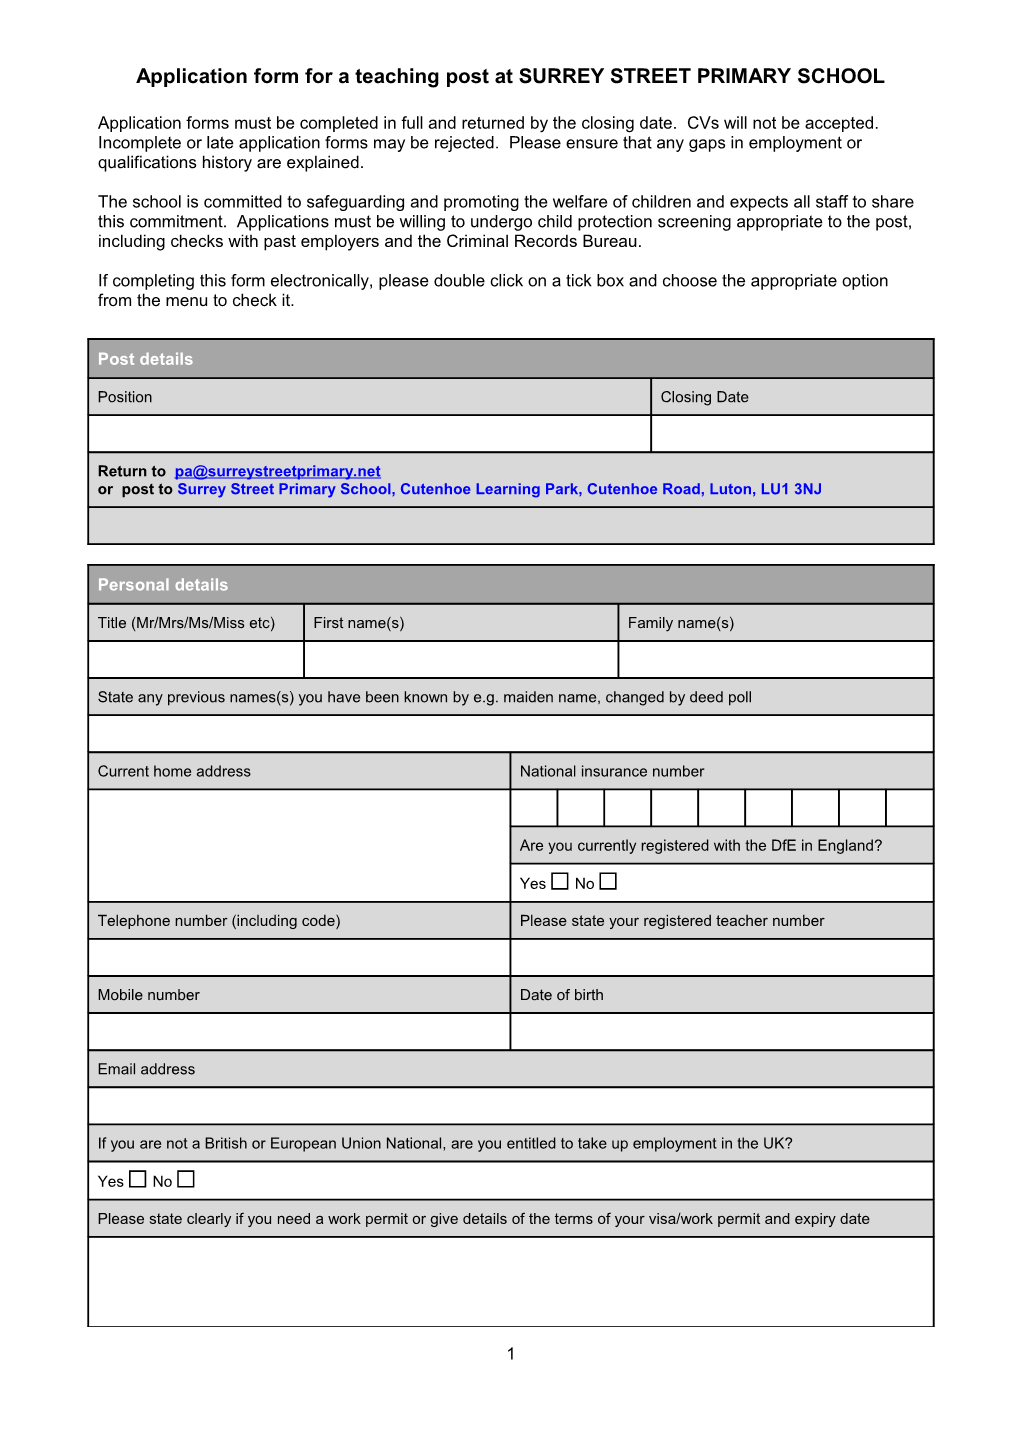 Application Form for a Teaching Post at SURREY STREET PRIMARY SCHOOL